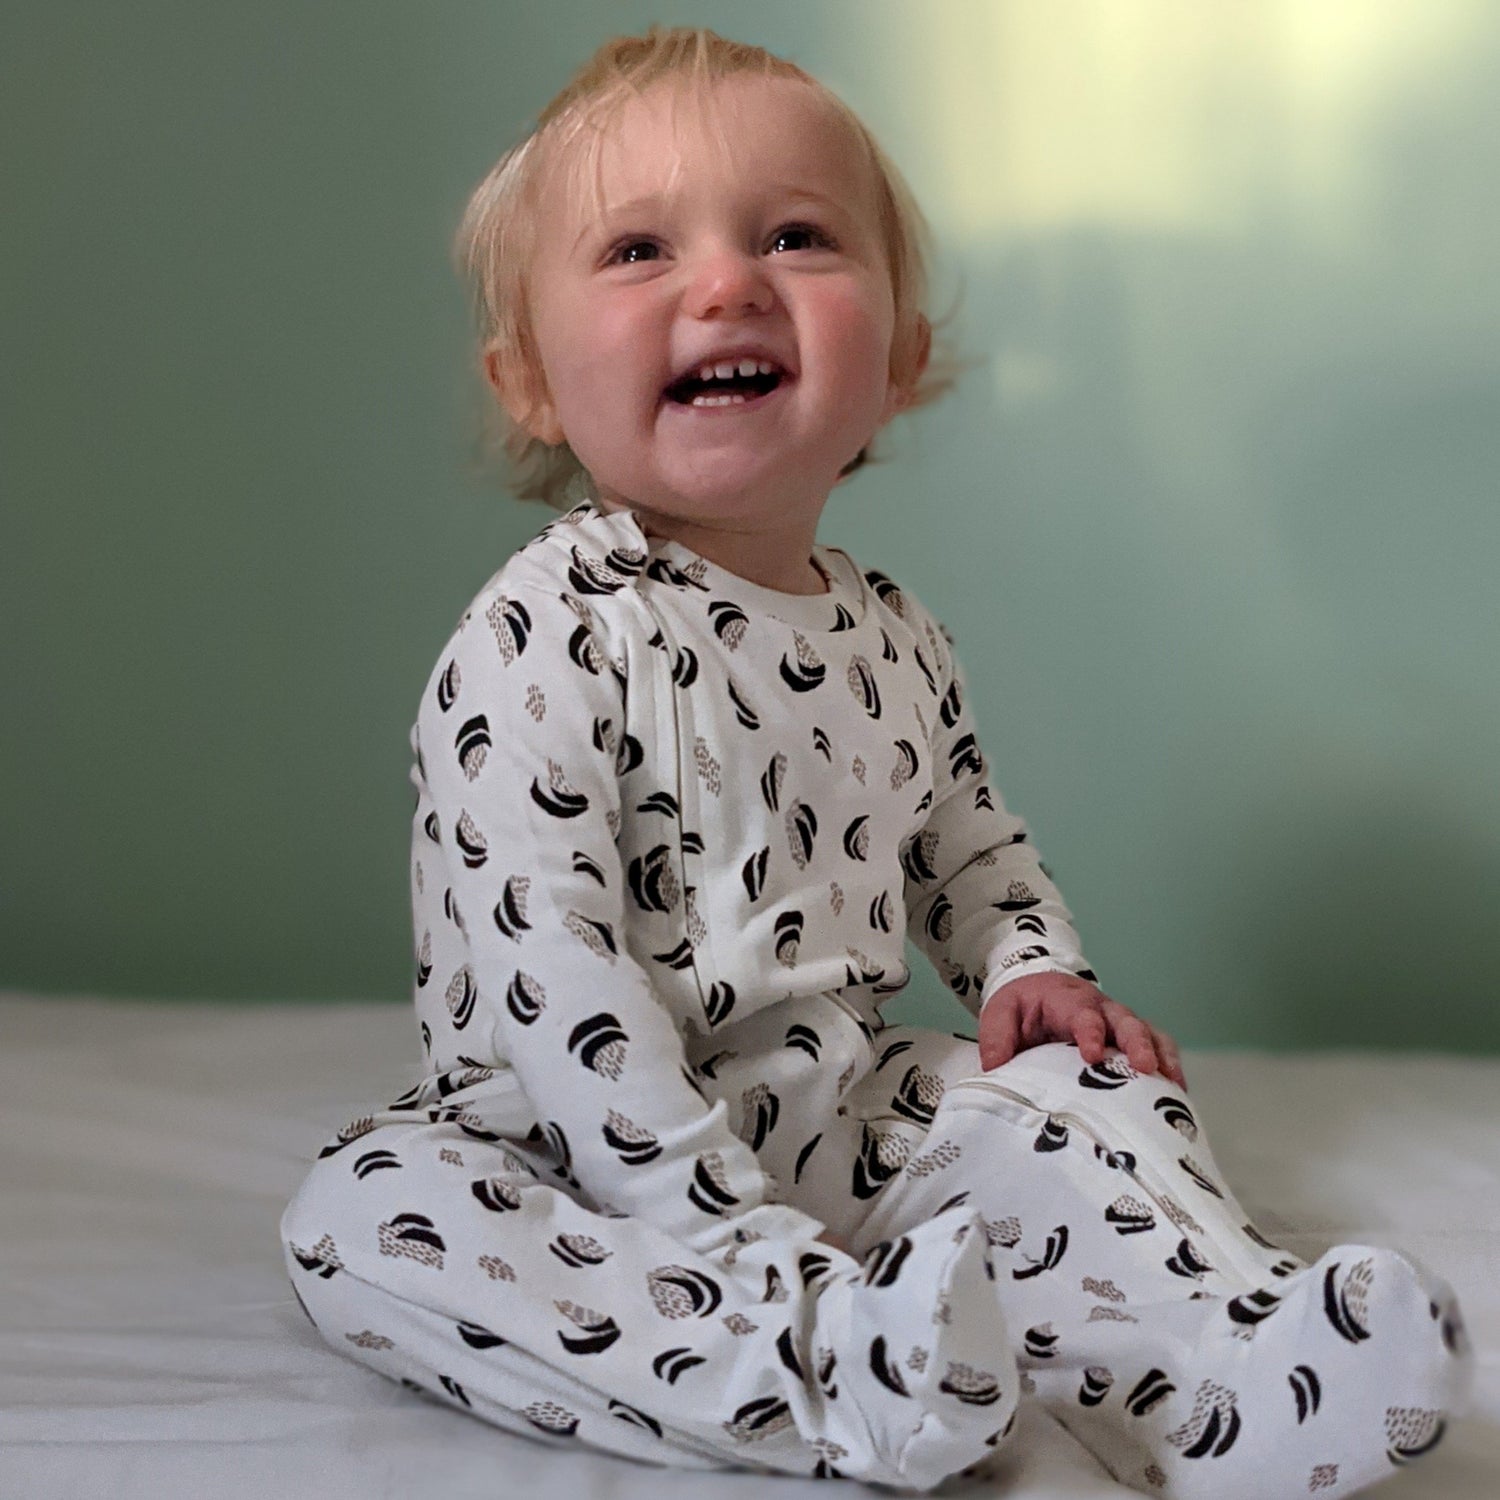 Baby smiling with wild print sleepsuit